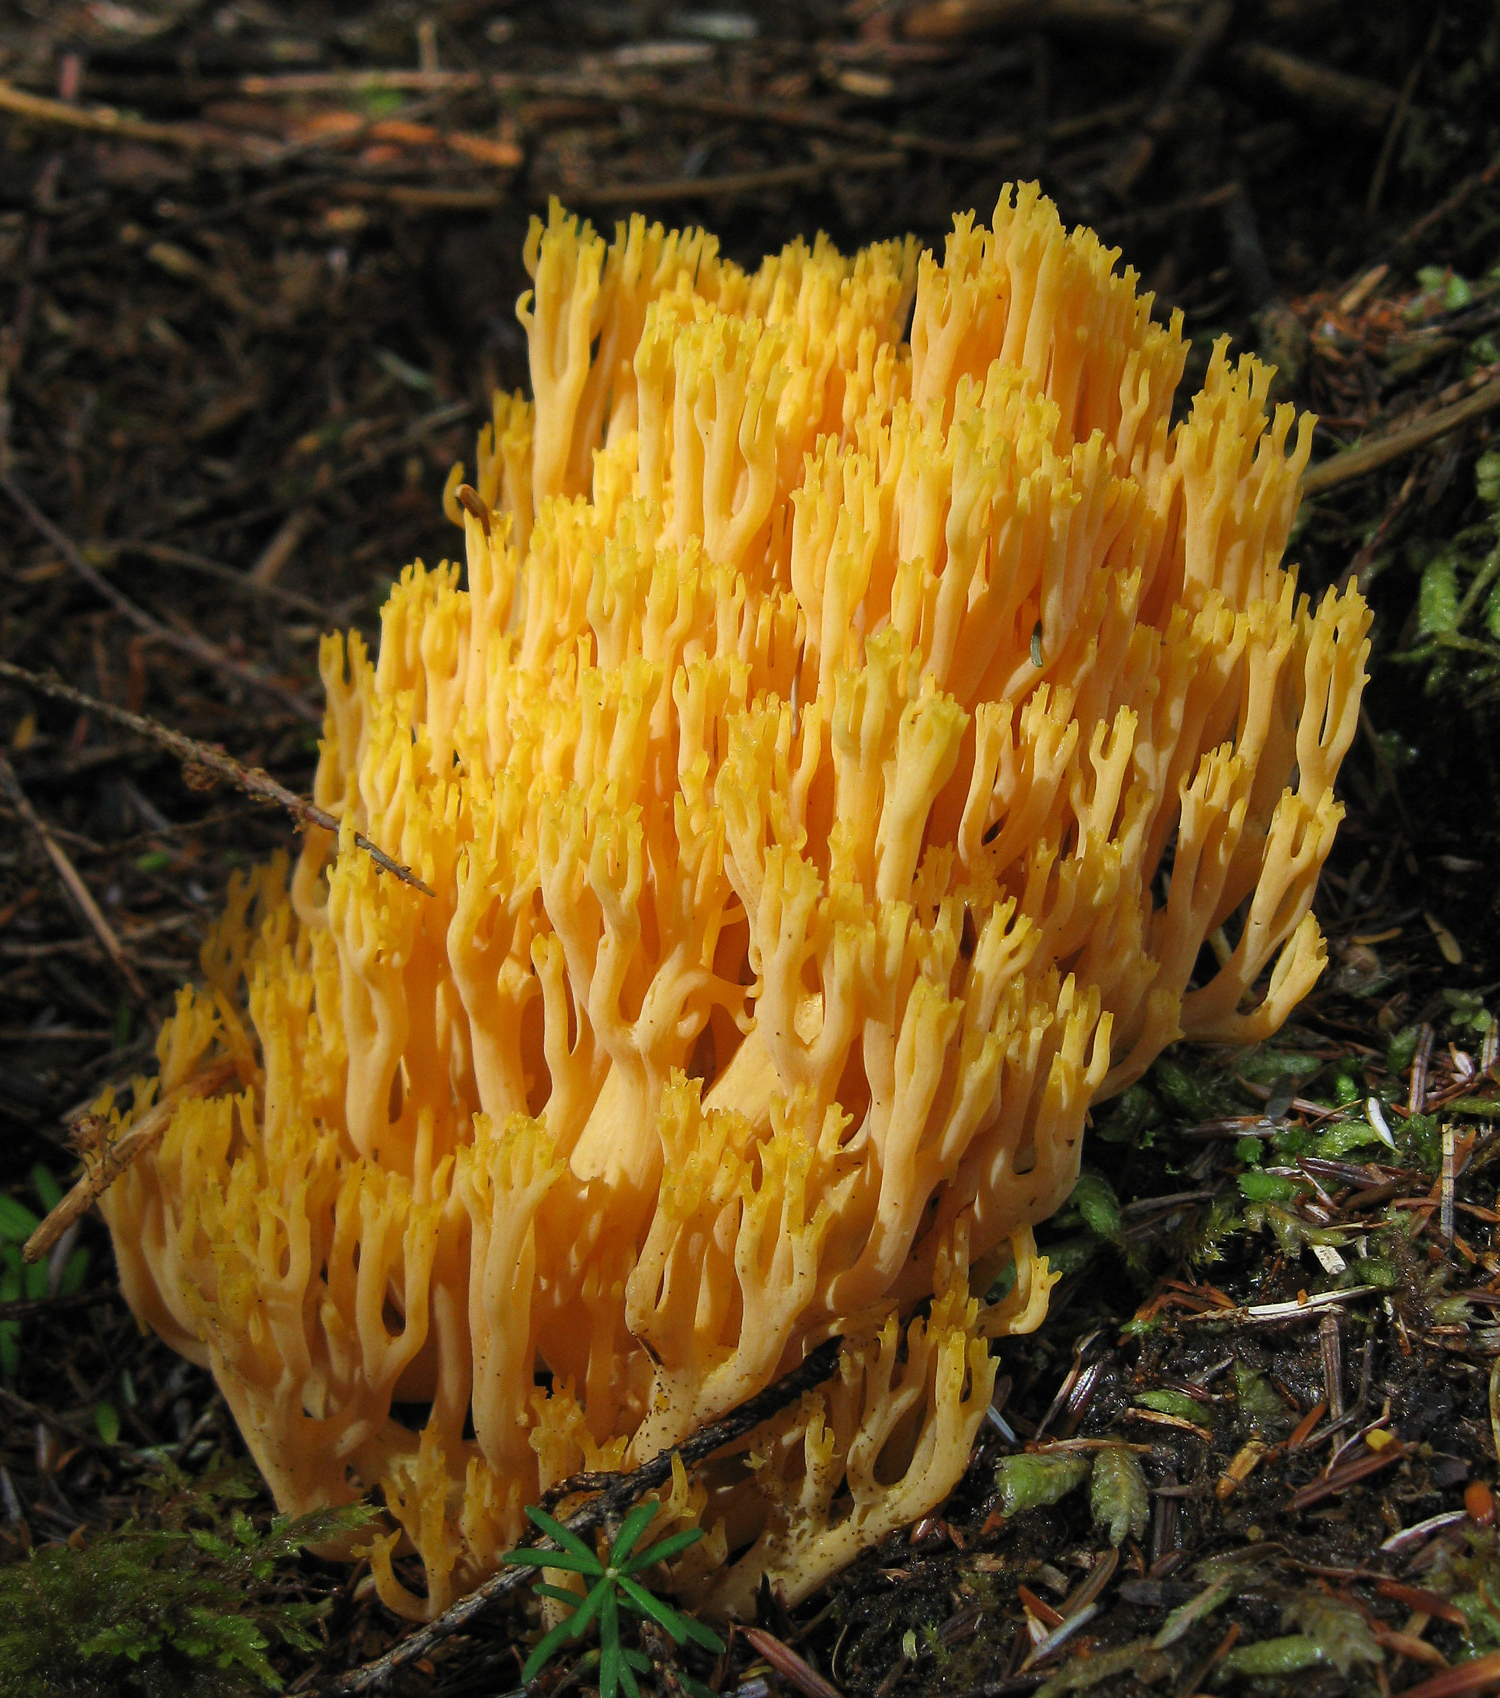 One of the great variety of coral mushrooms. Some are edible and some are not, and it is very difficult to tell the difference.